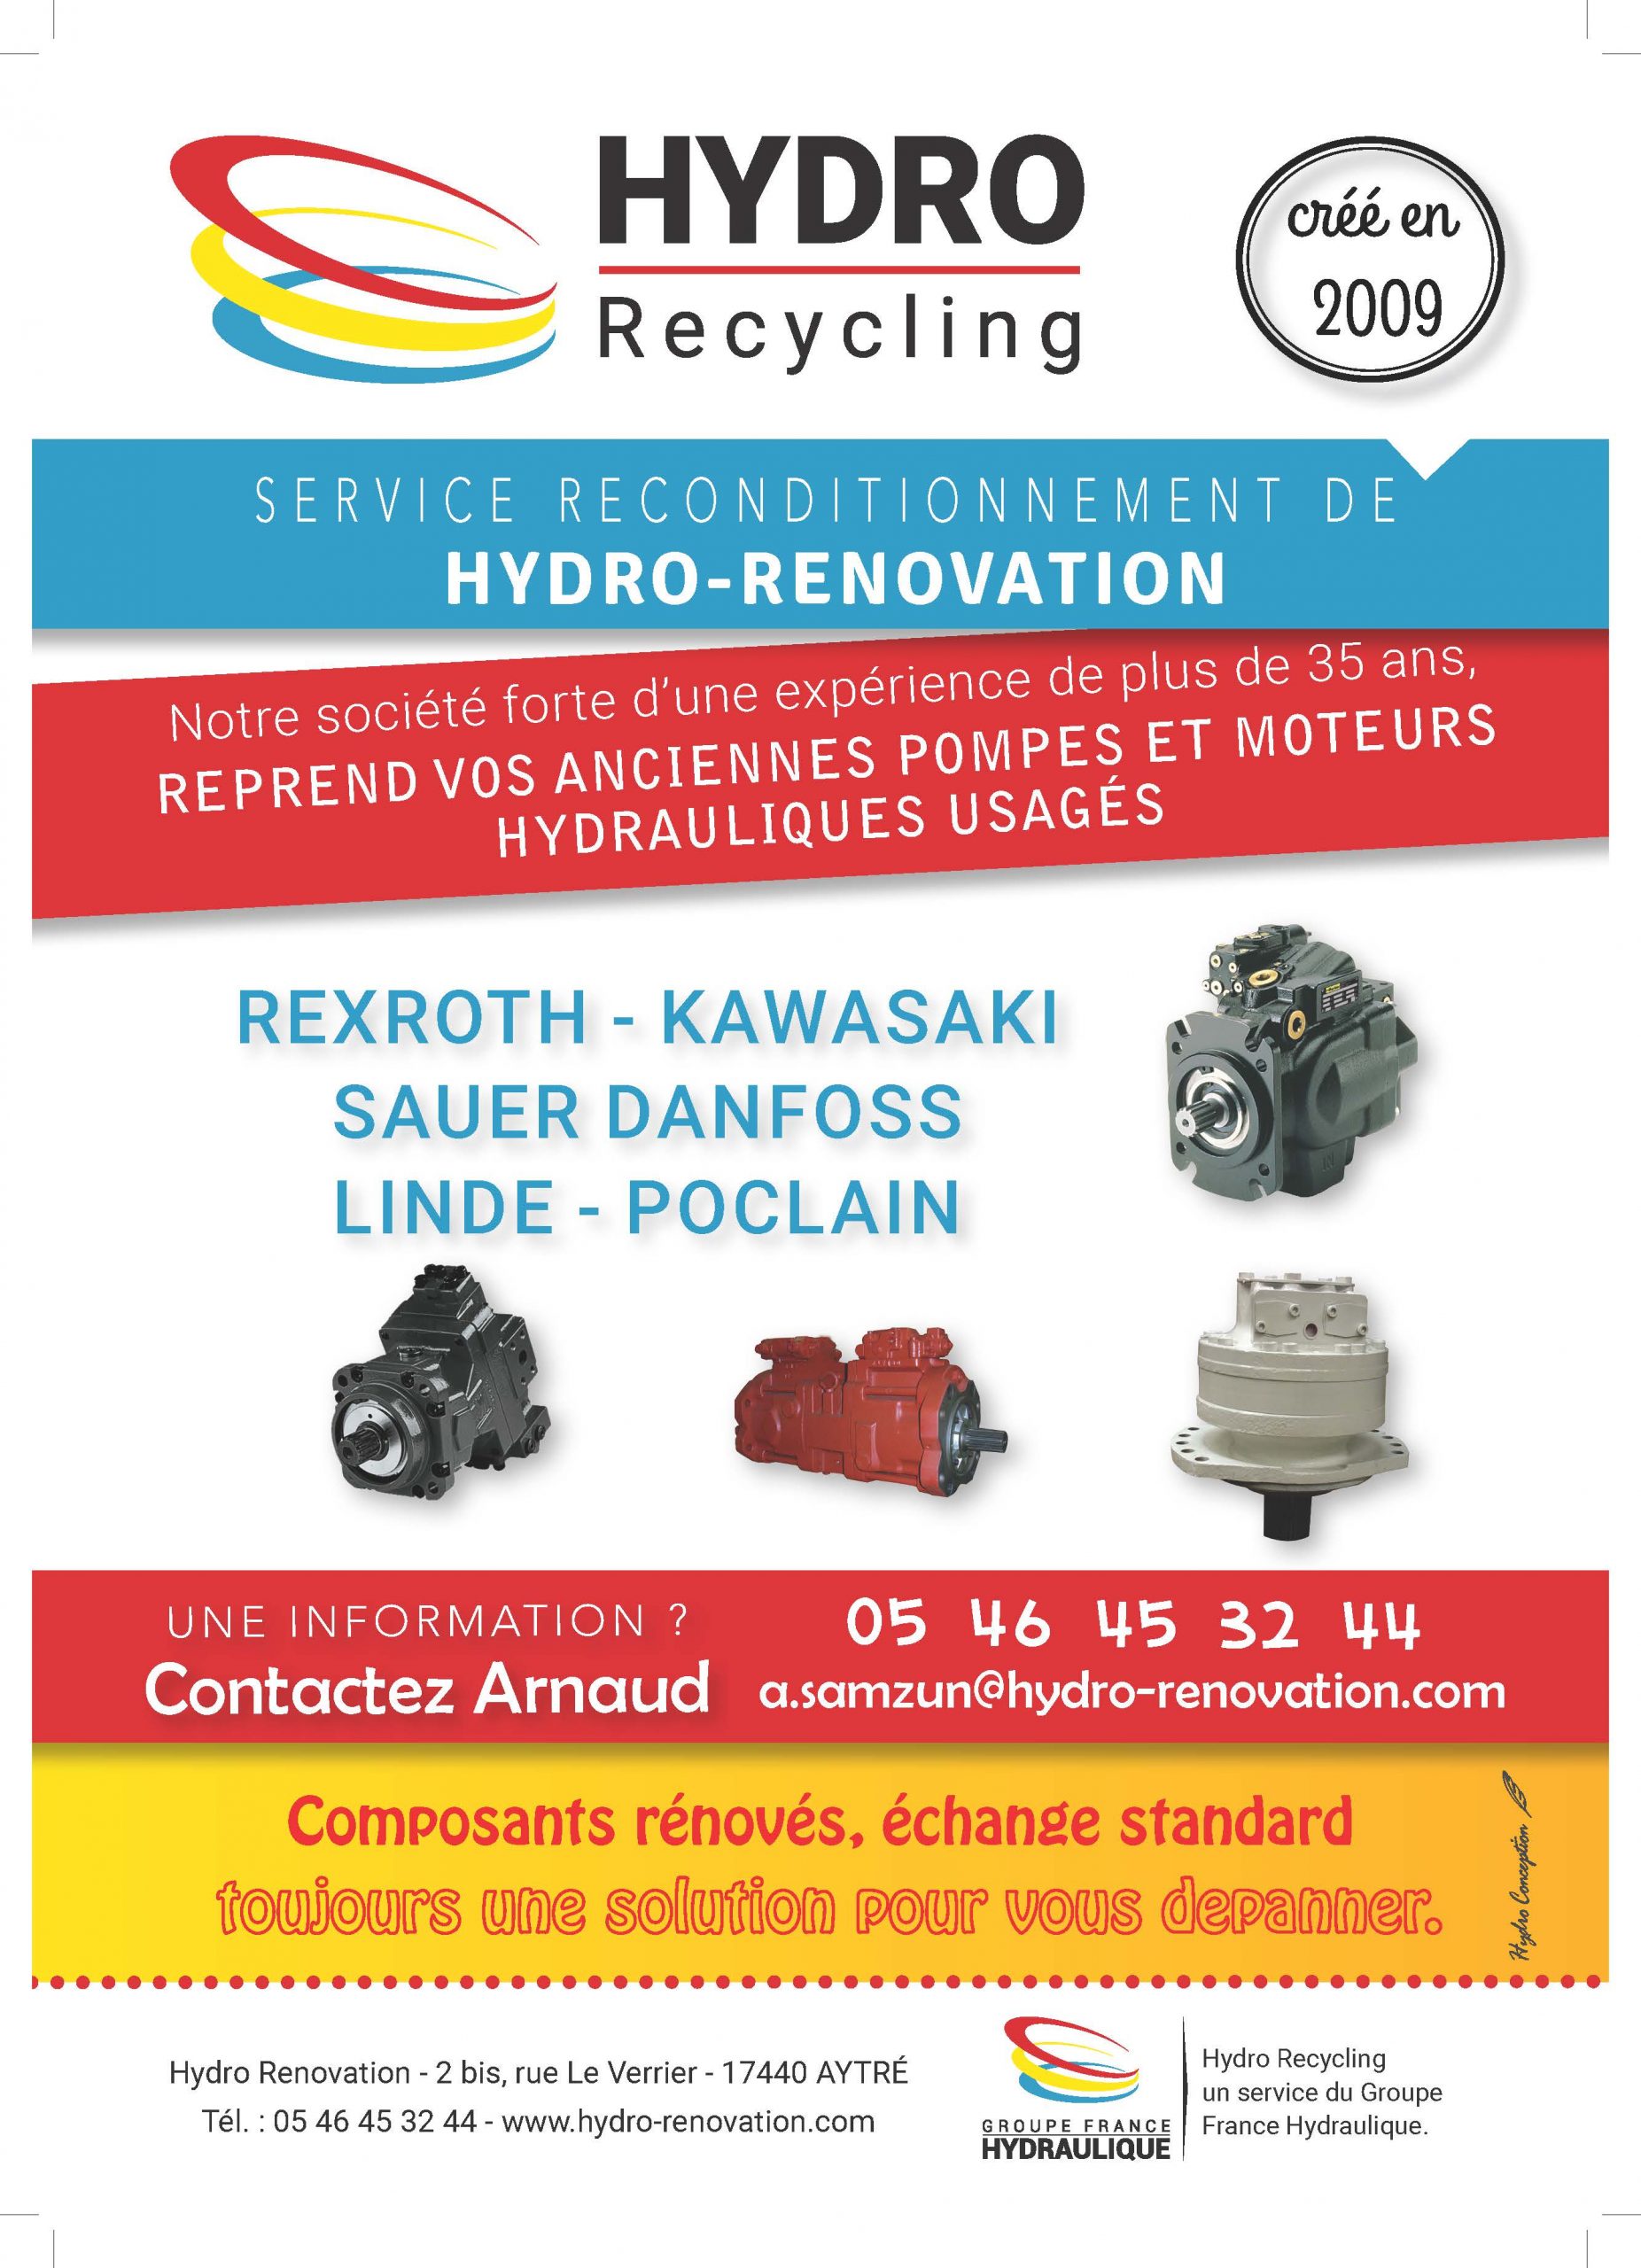 Hydro Recycling